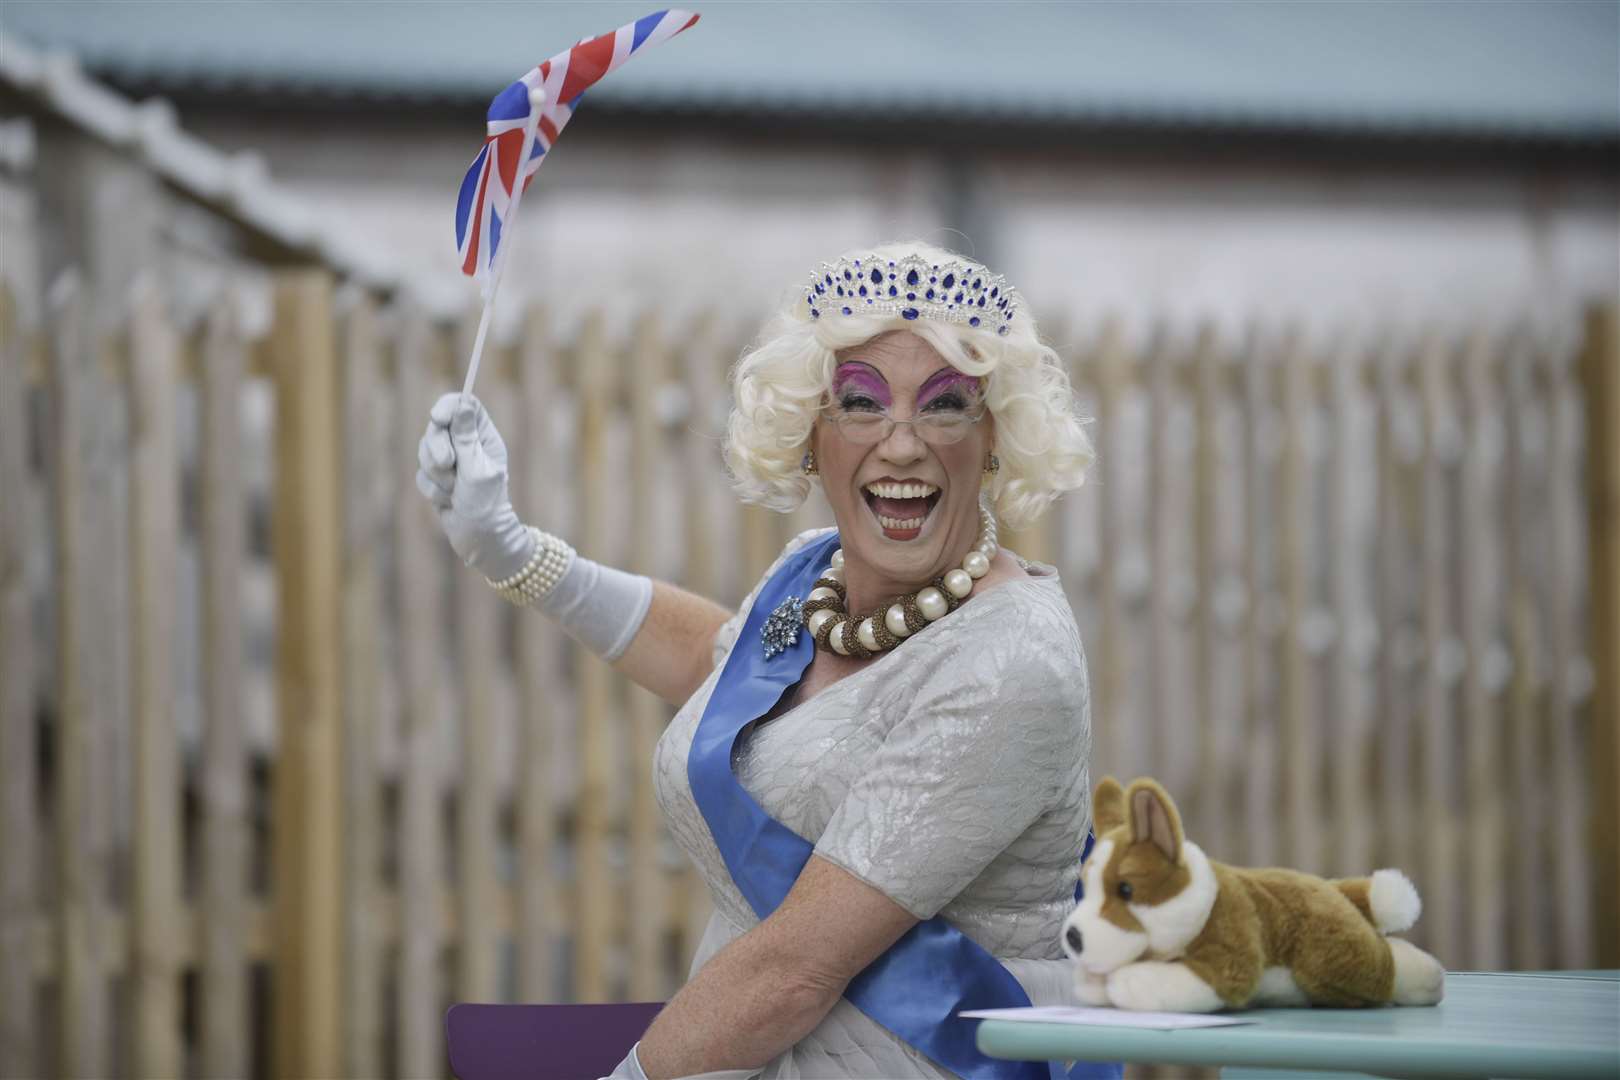 The Dreamland Queen, played by TV personality Paulus @thecabaretgeek, joined in the 100th birthday celebrations